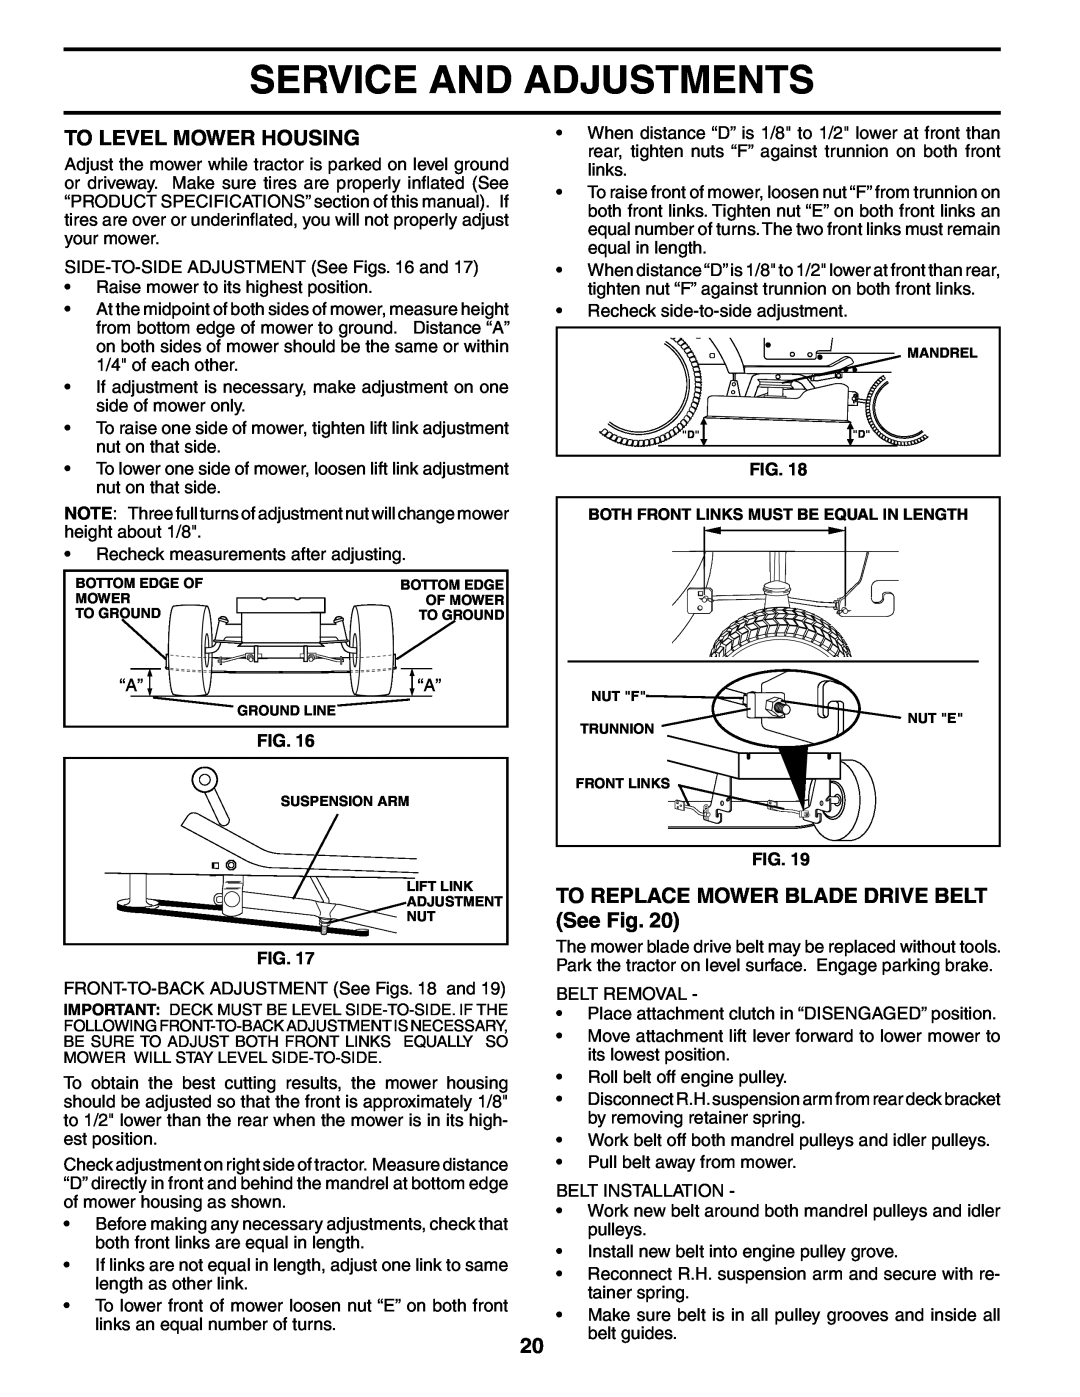 Weed Eater WE1338A, 184404 manual To Level Mower Housing, TO REPLACE MOWER BLADE DRIVE BELT See Fig, Service And Adjustments 